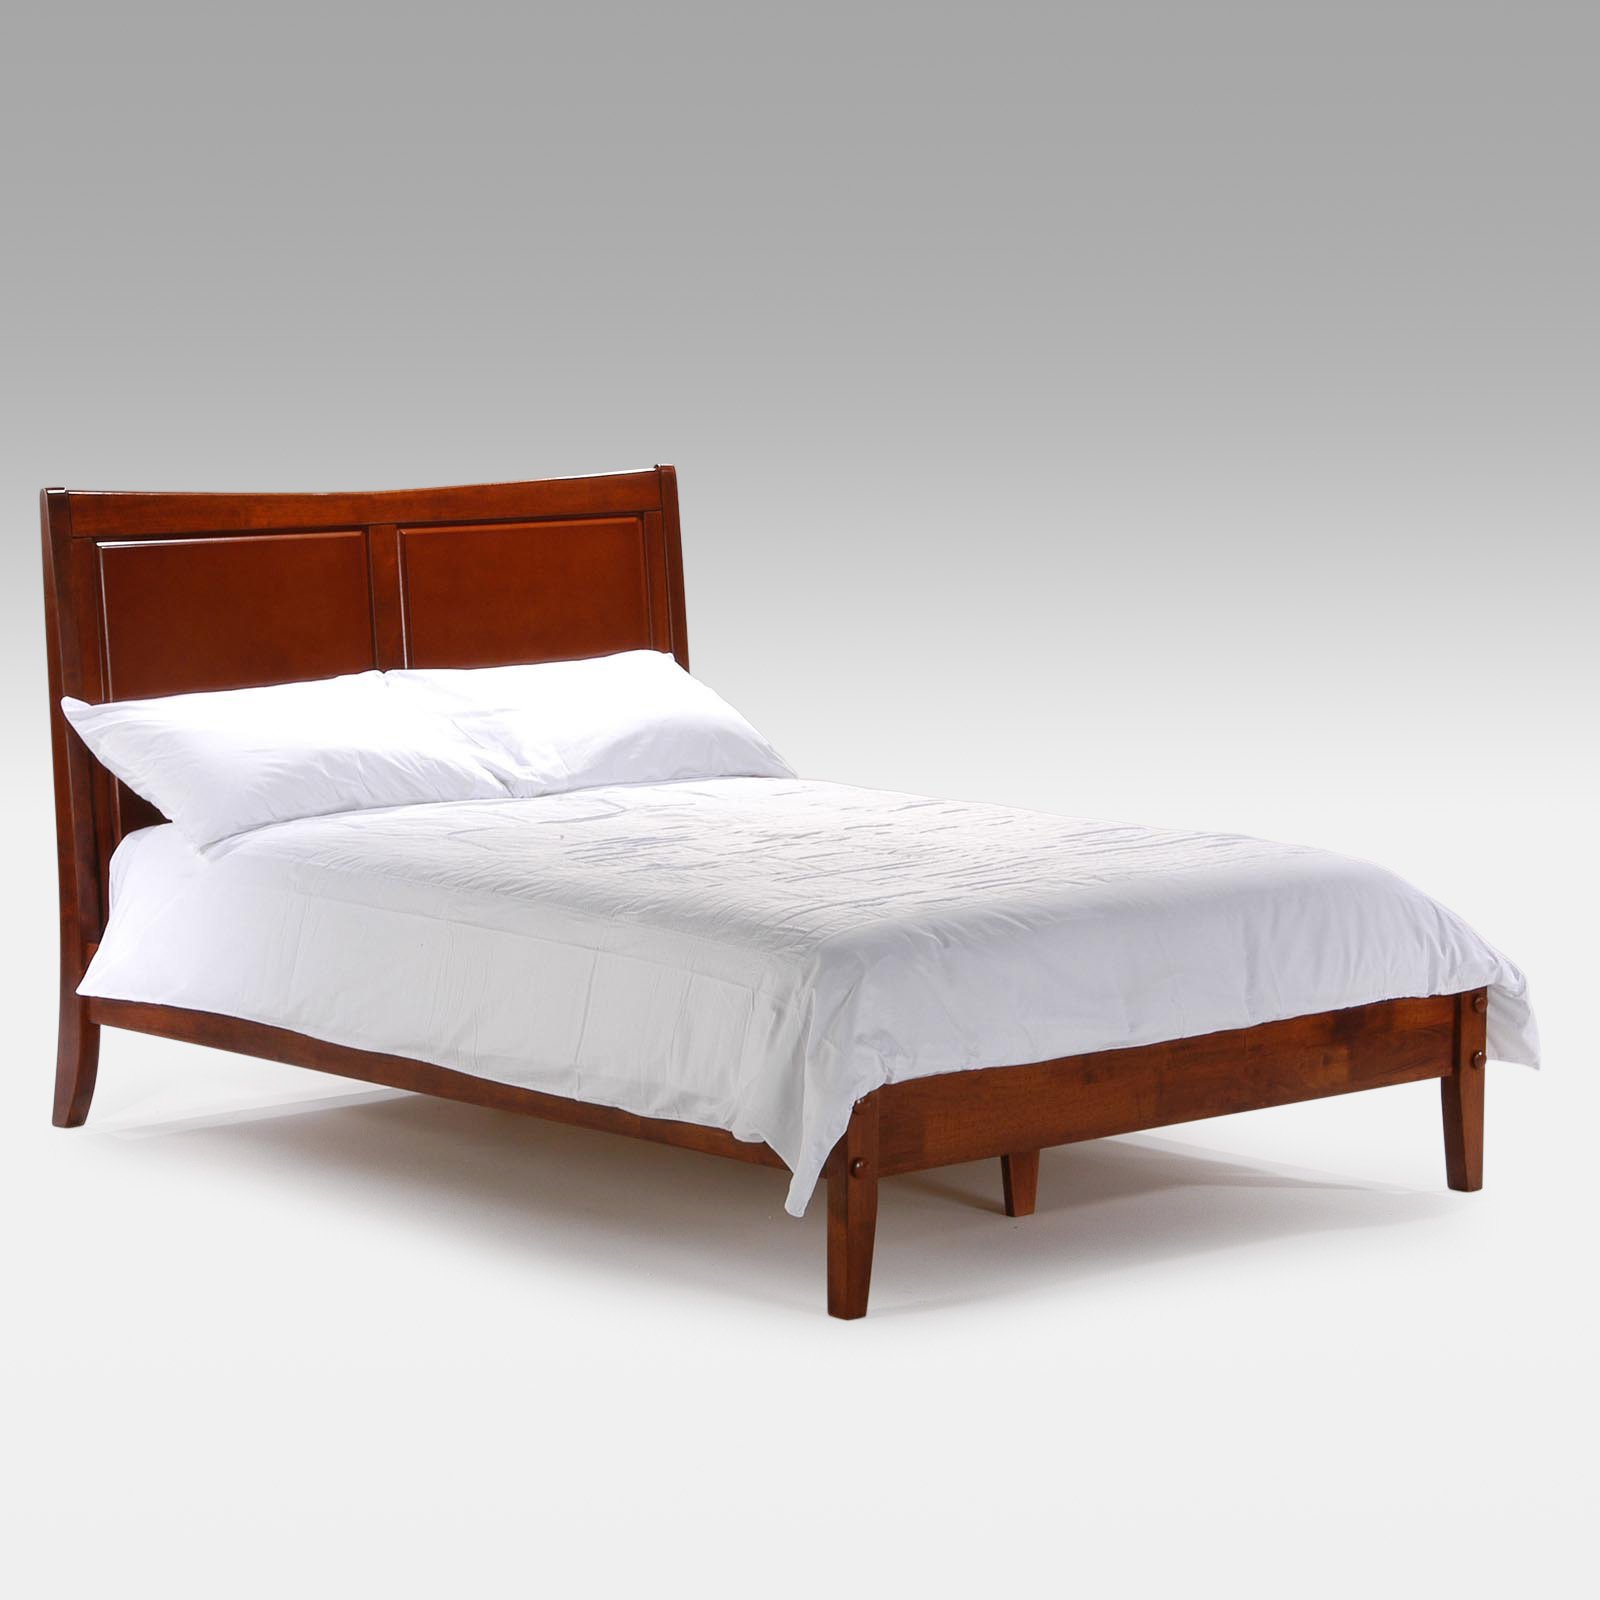 Beautiful Extra Long Twin Beds Hd For Your Xl Twin - Tarragon Night And Day Furniture P Series , HD Wallpaper & Backgrounds